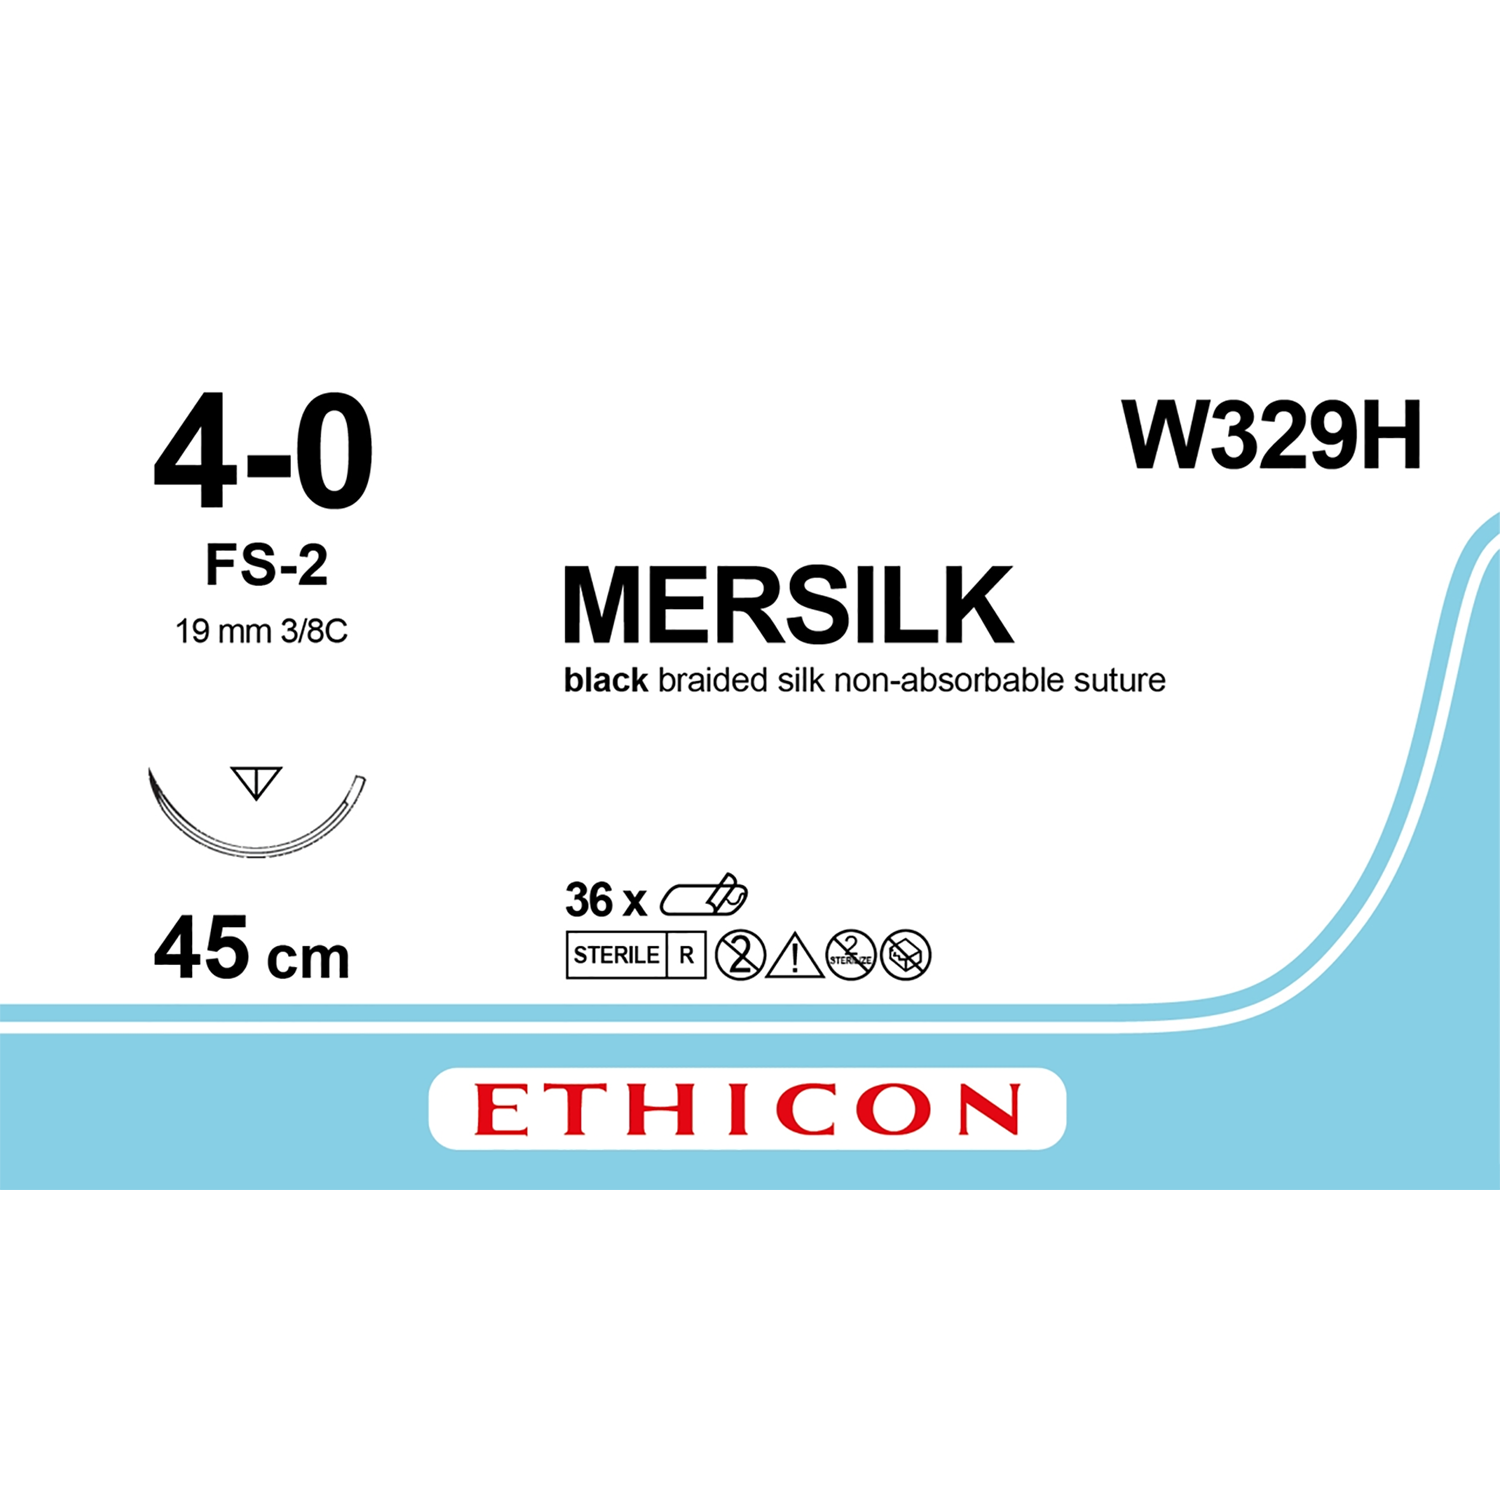 Ethicon Mersilk Suture | Non Absorbable | Black | Size: 4-0 | Length: 45cm | Needle: FS-2 | Pack of 36